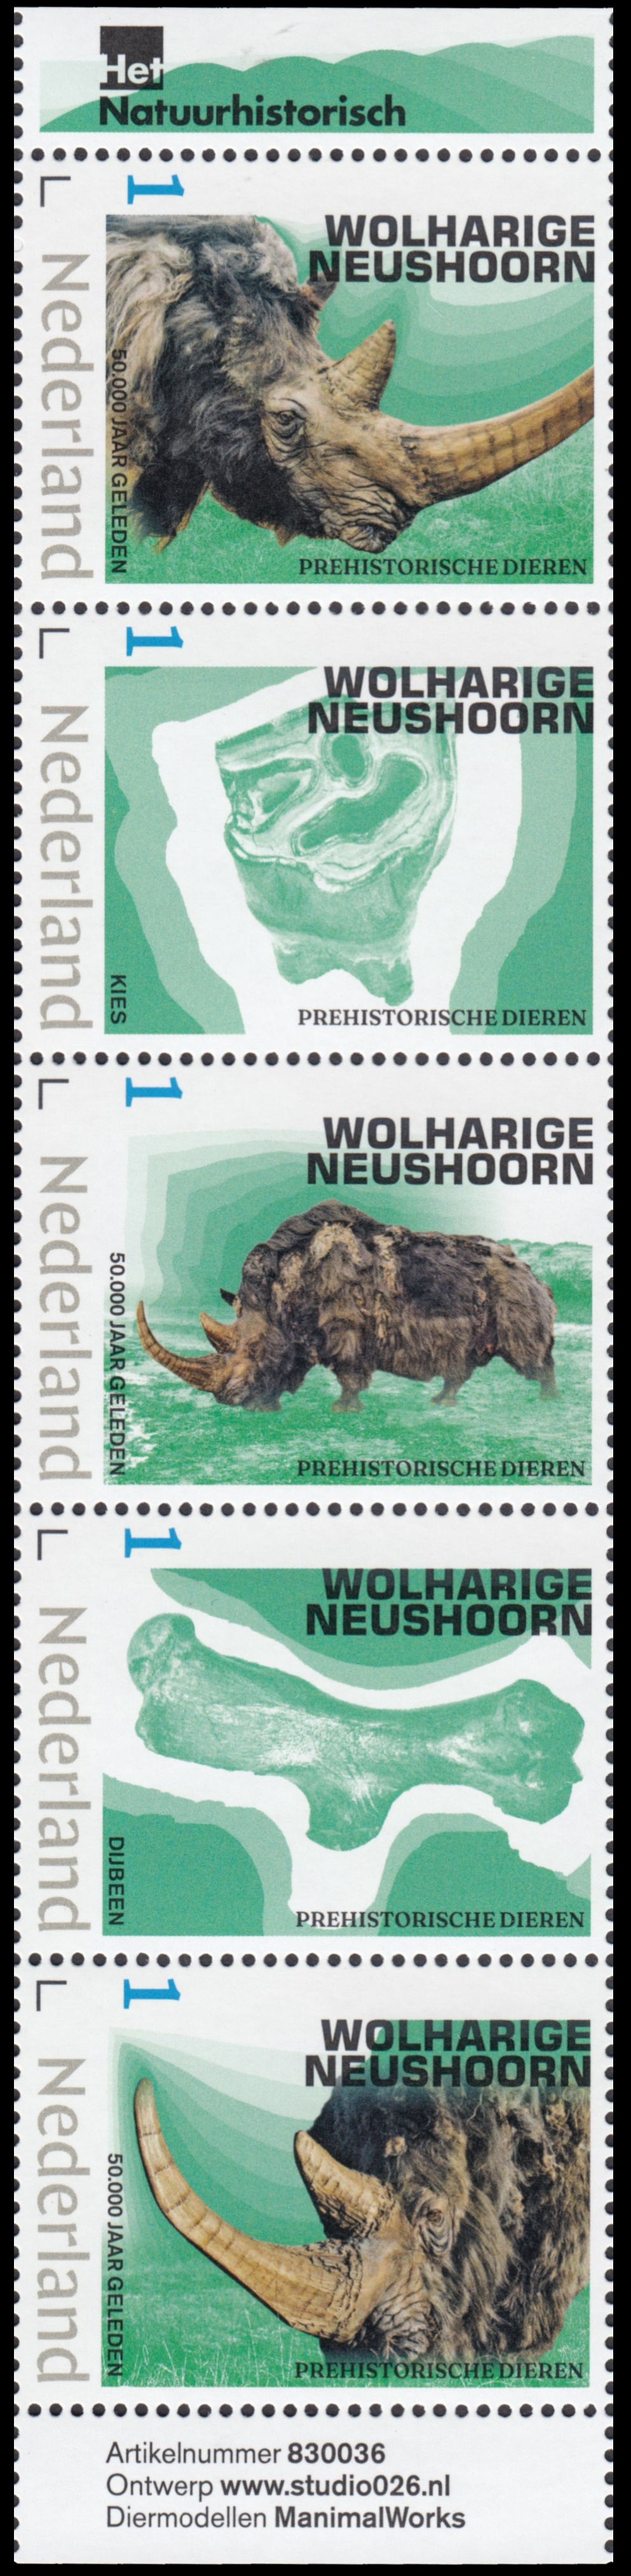 Woolly Rhinoceros stamps of the Netherlands 2023